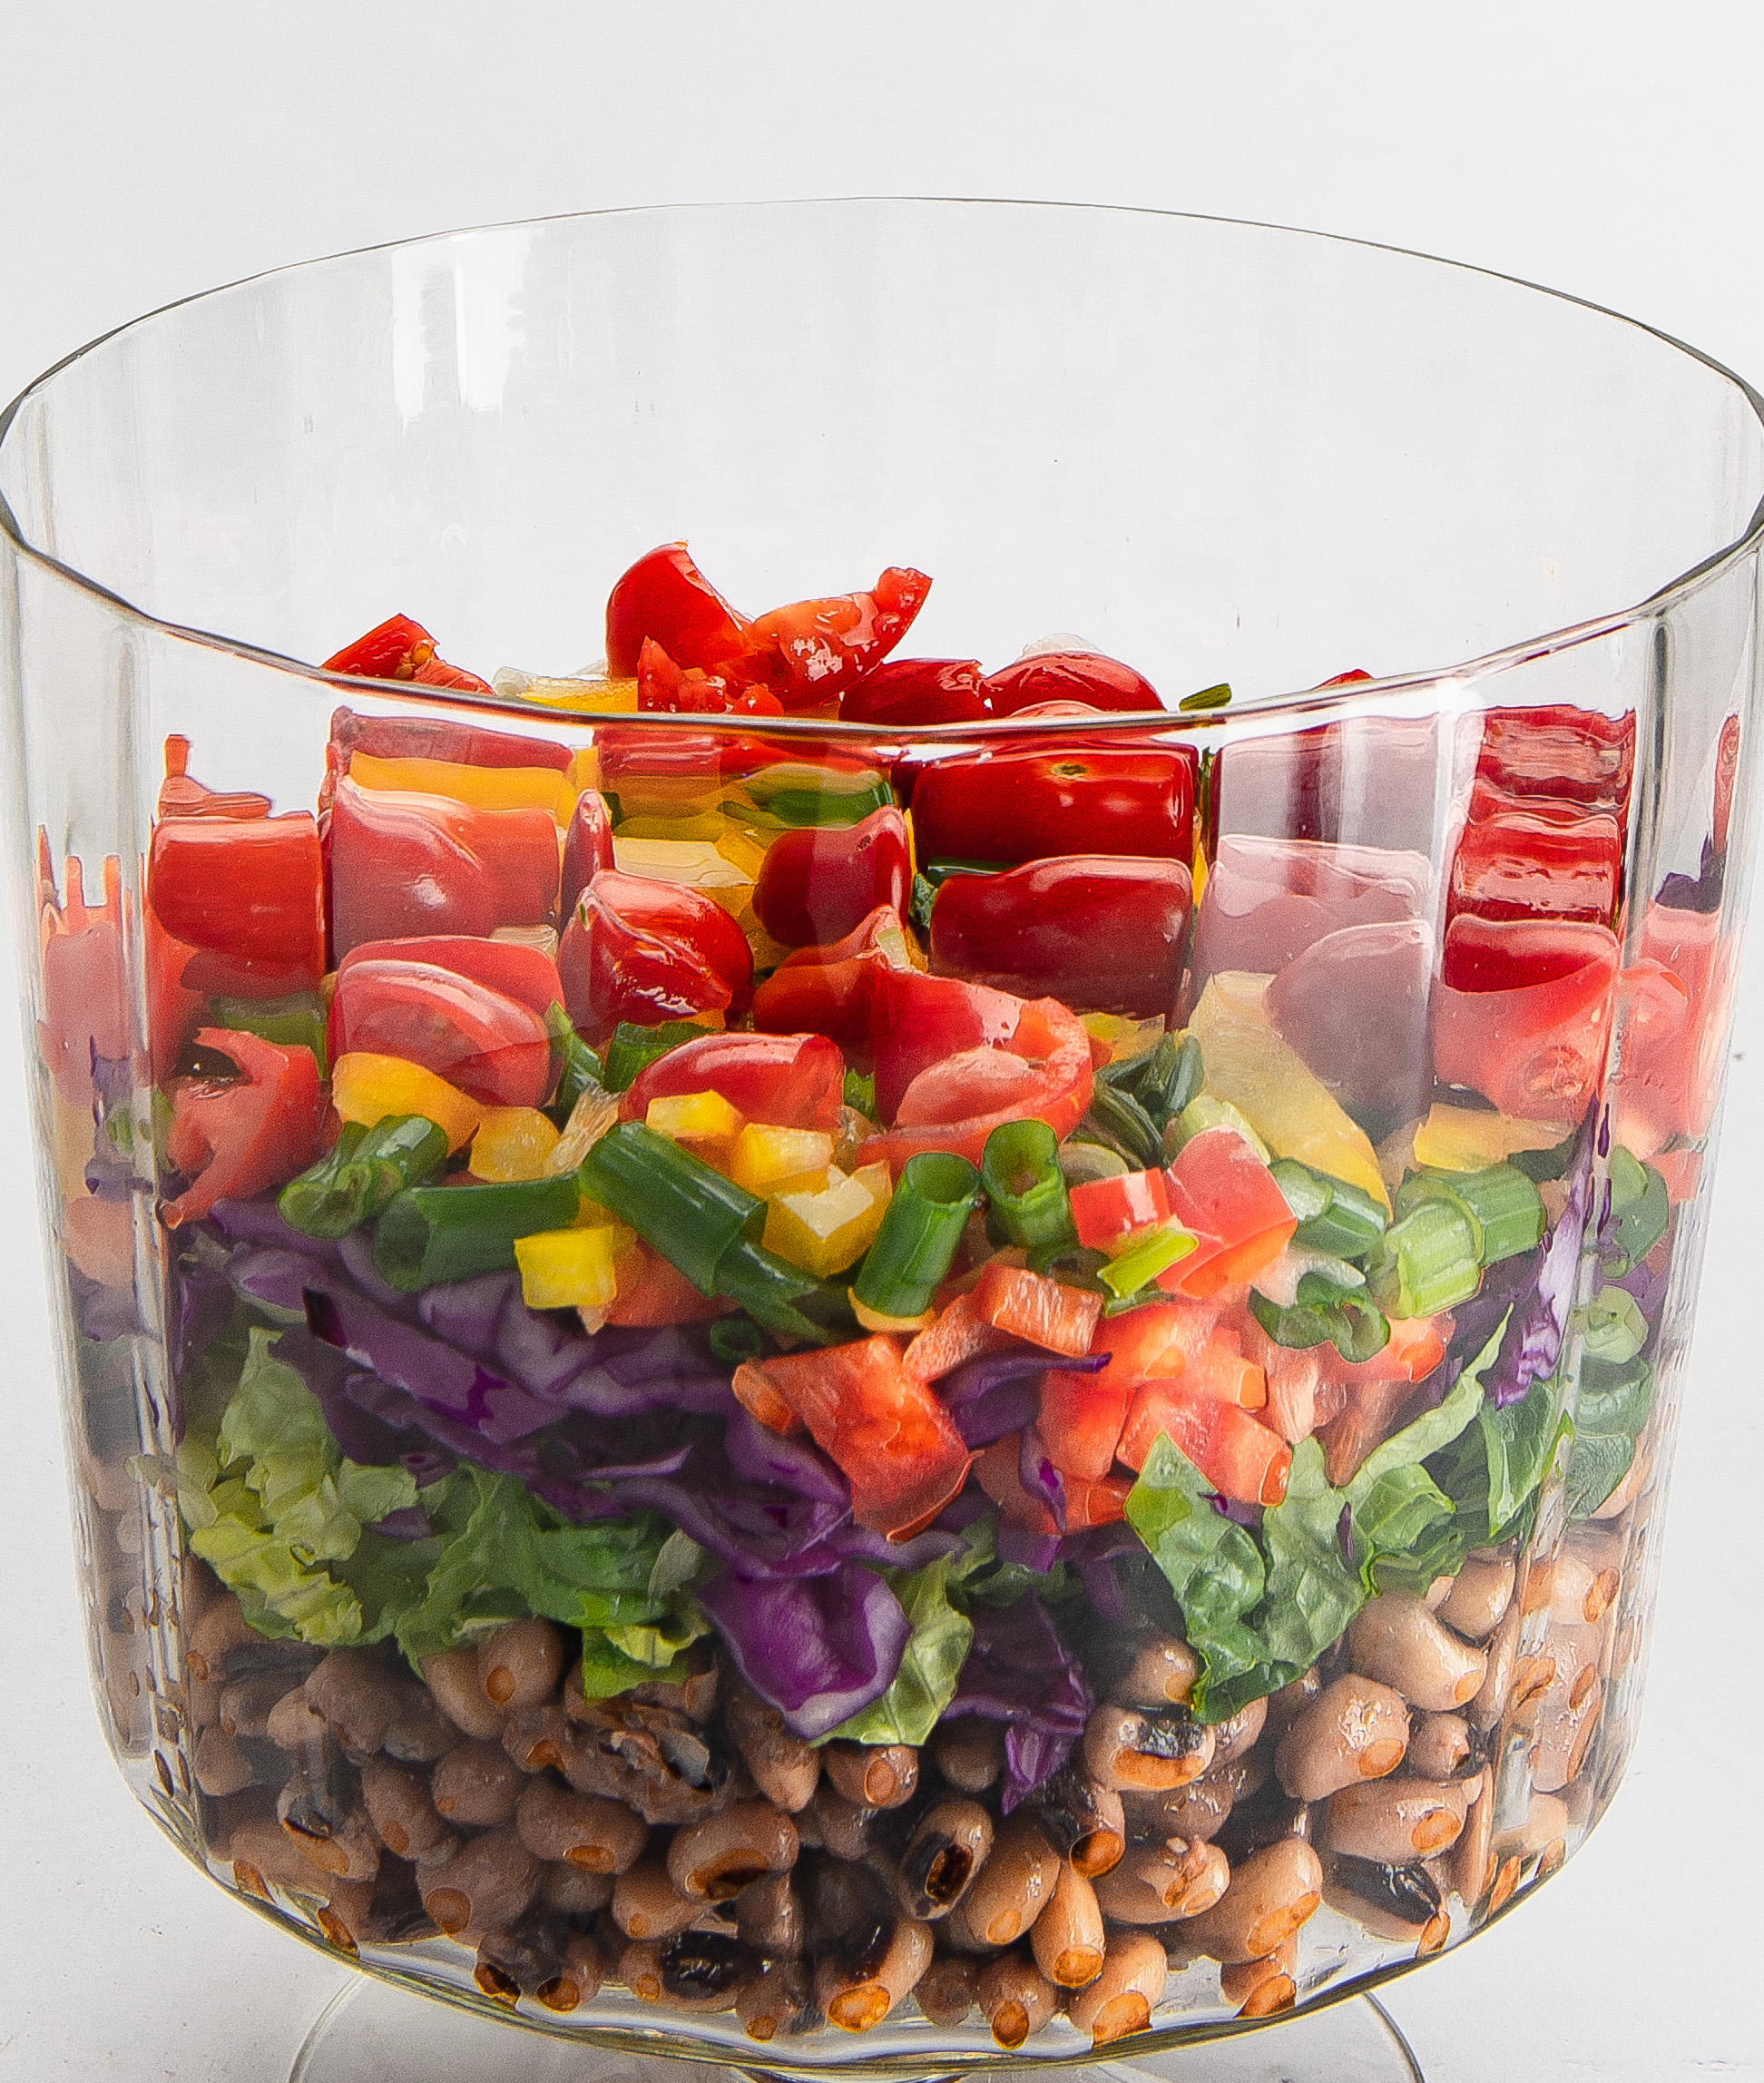 New Year’s  Day Traditions and  Black-Eyed Pea Salad